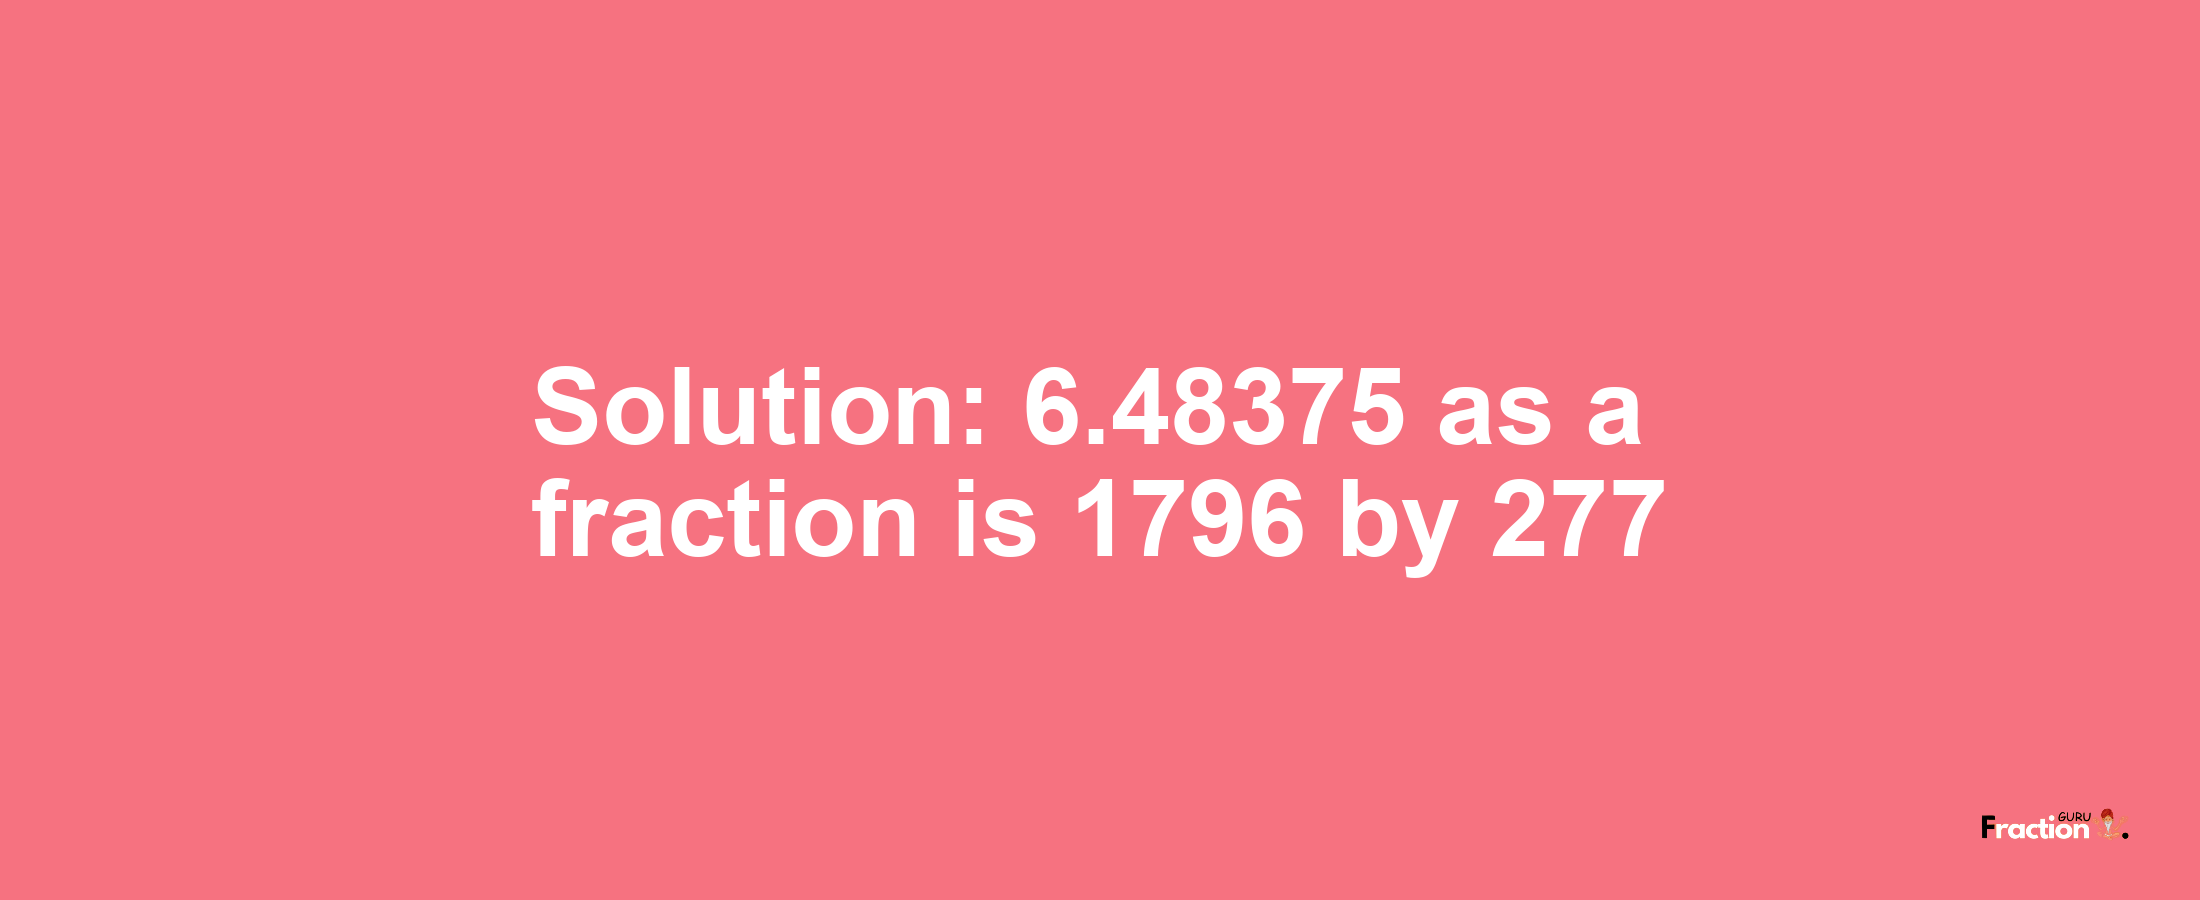 Solution:6.48375 as a fraction is 1796/277